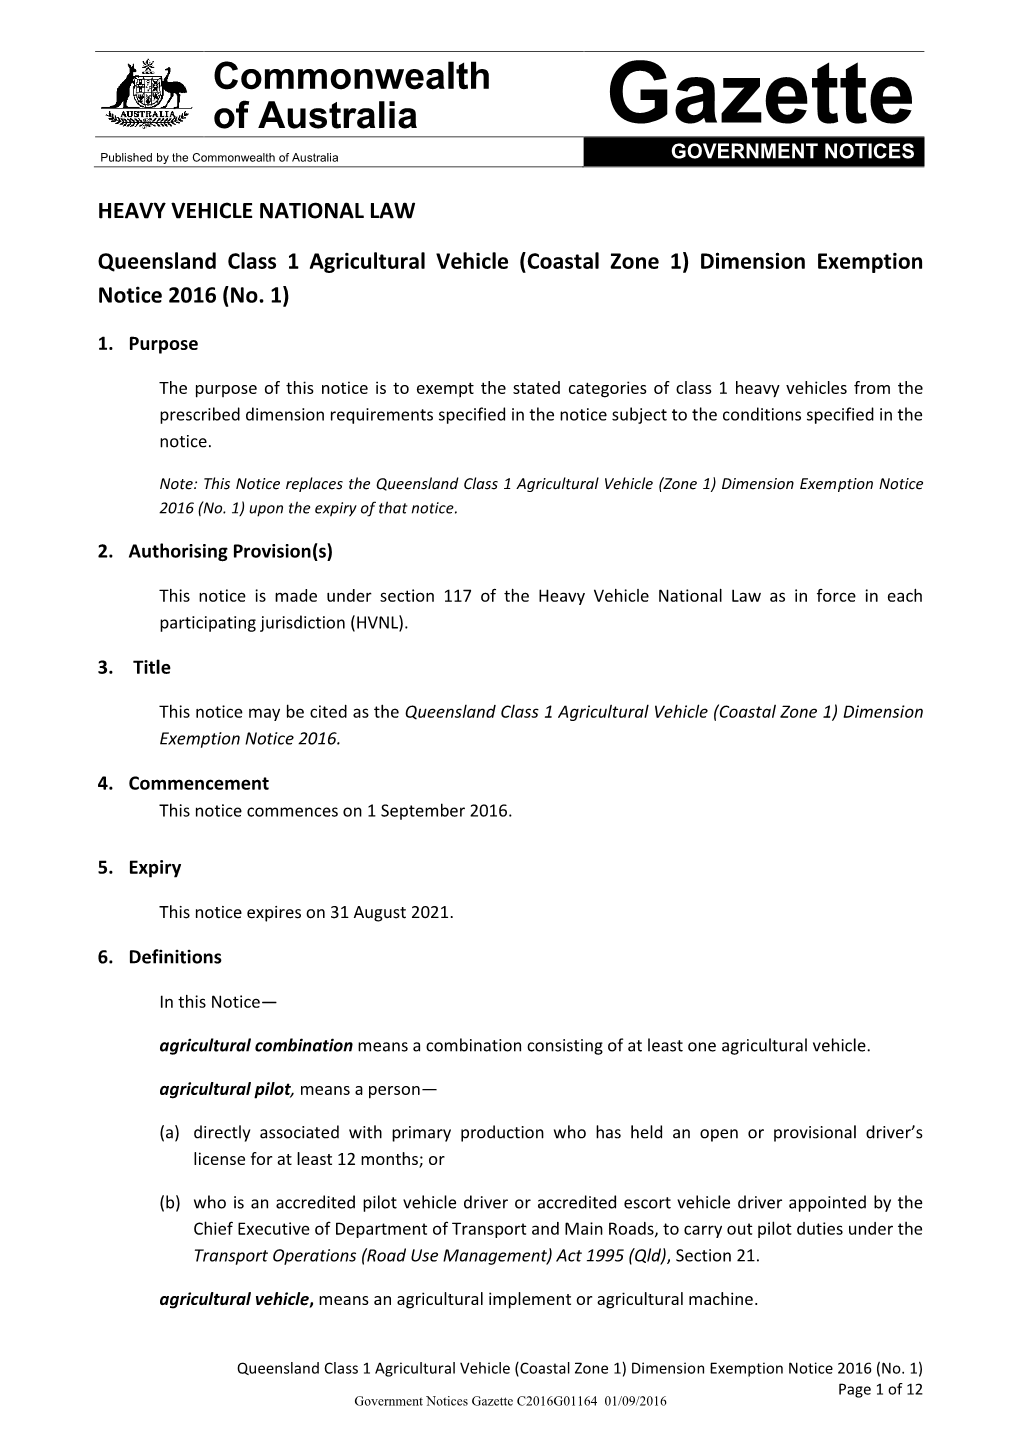 Queensland Class 1 Agricultural Vehicle (Coastal Zone 1) Dimension Exemption Notice 2016 (No